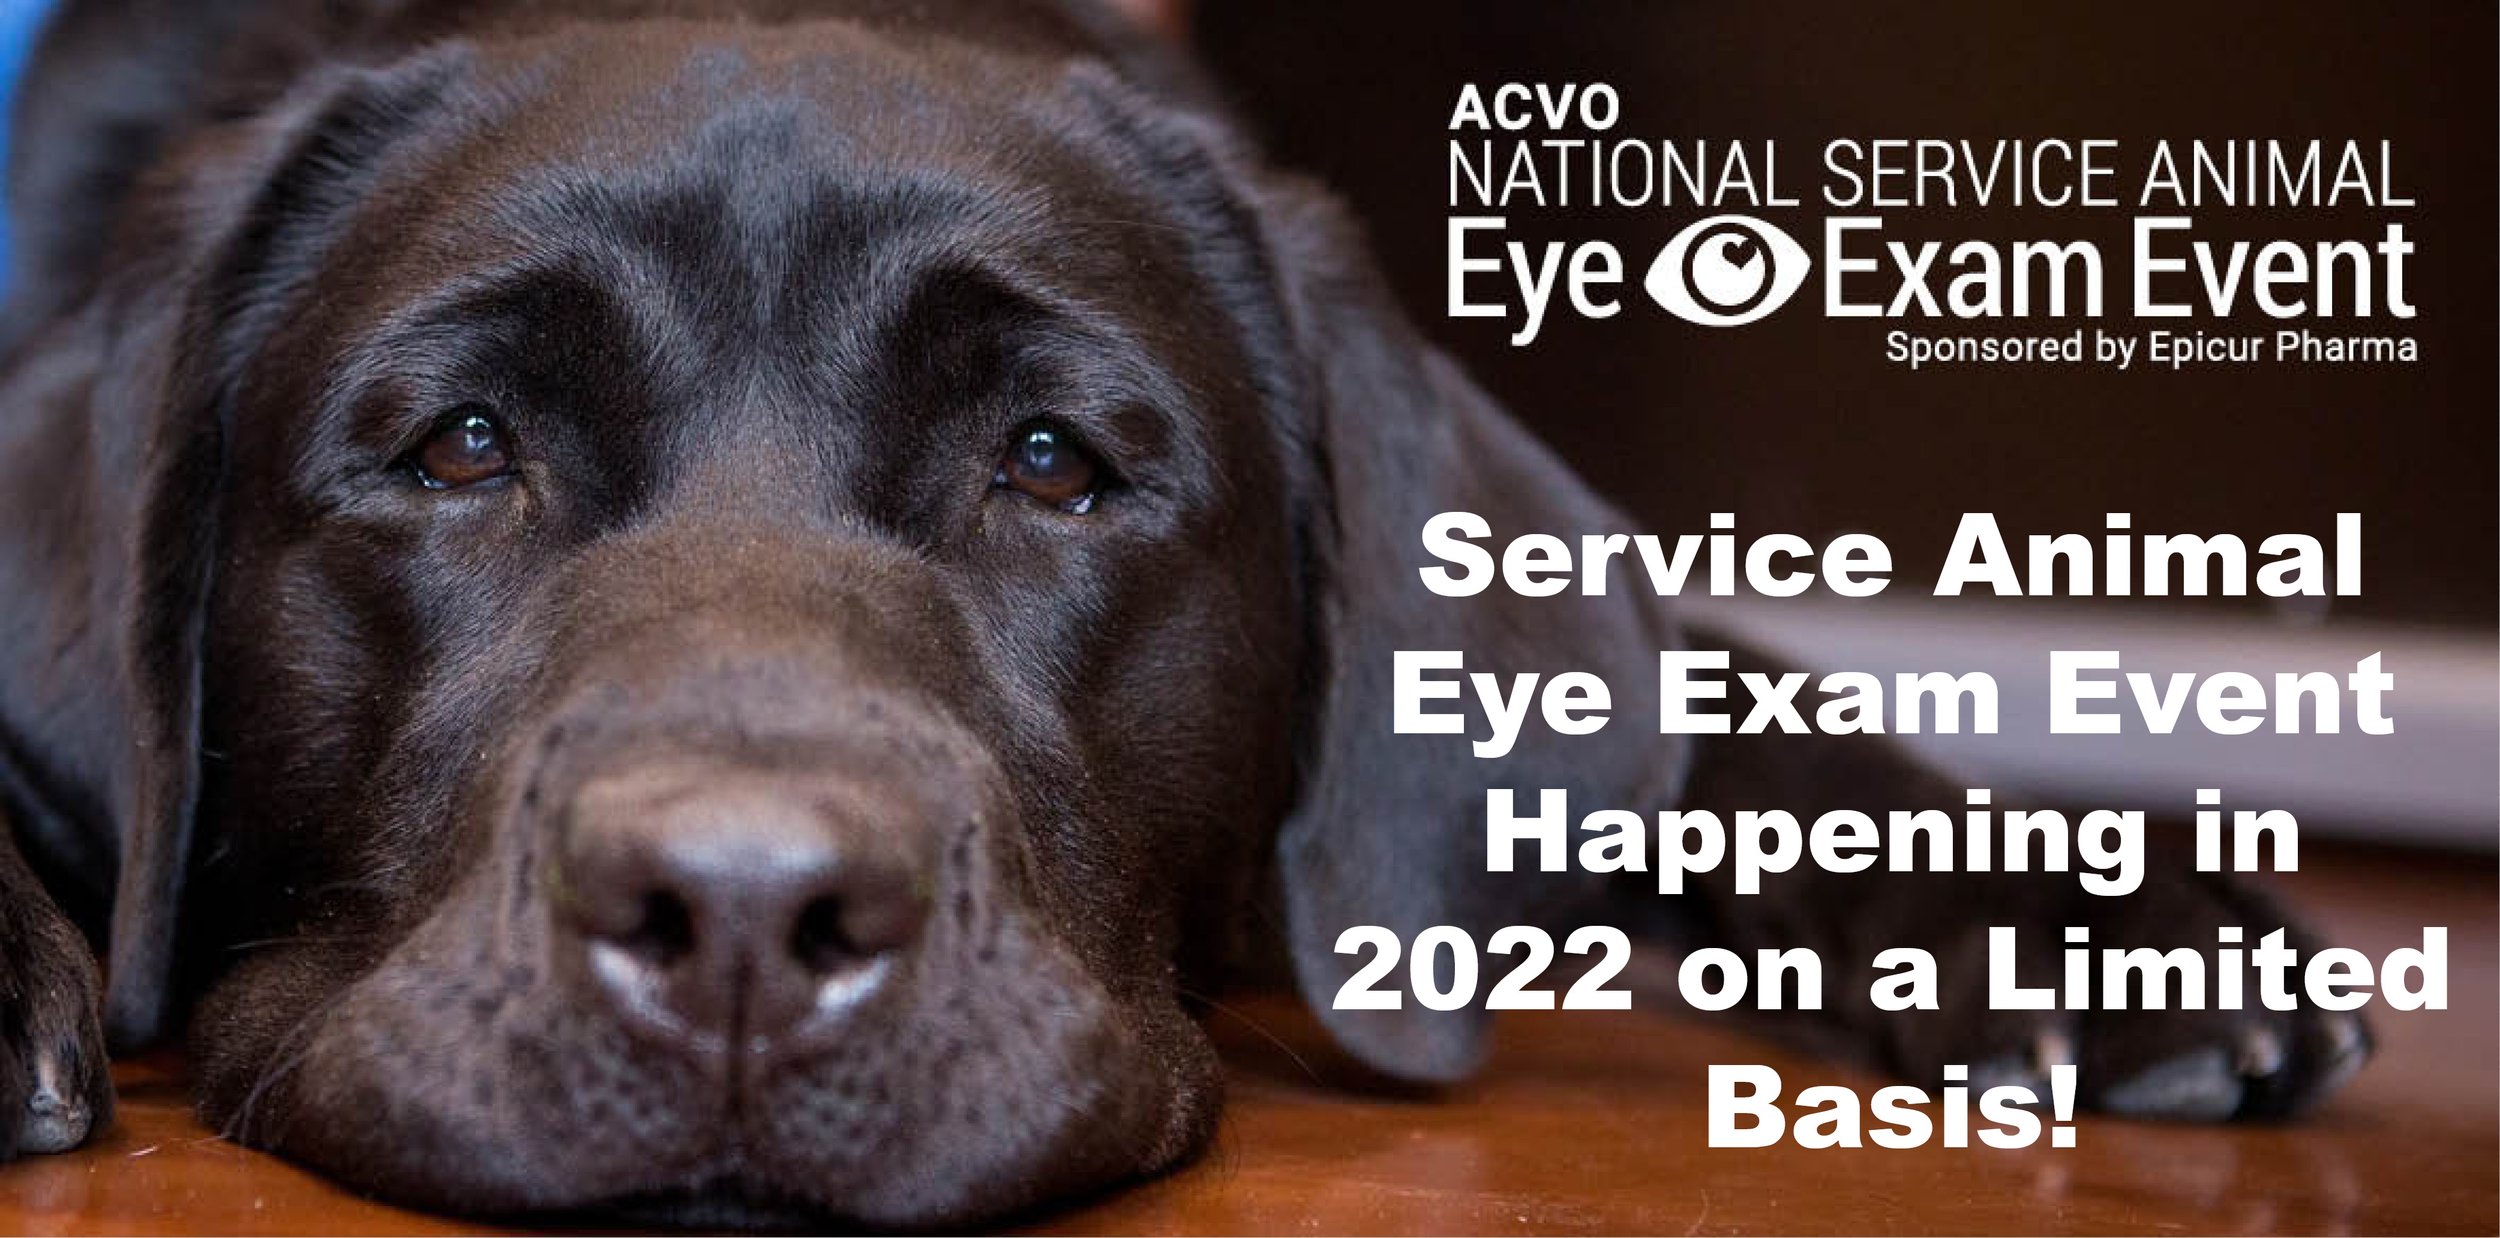 2022 ACVO/Epicur National Service Animal Eye Exam Event Happening in 2022  on a Limited Basis! — ACVO Public